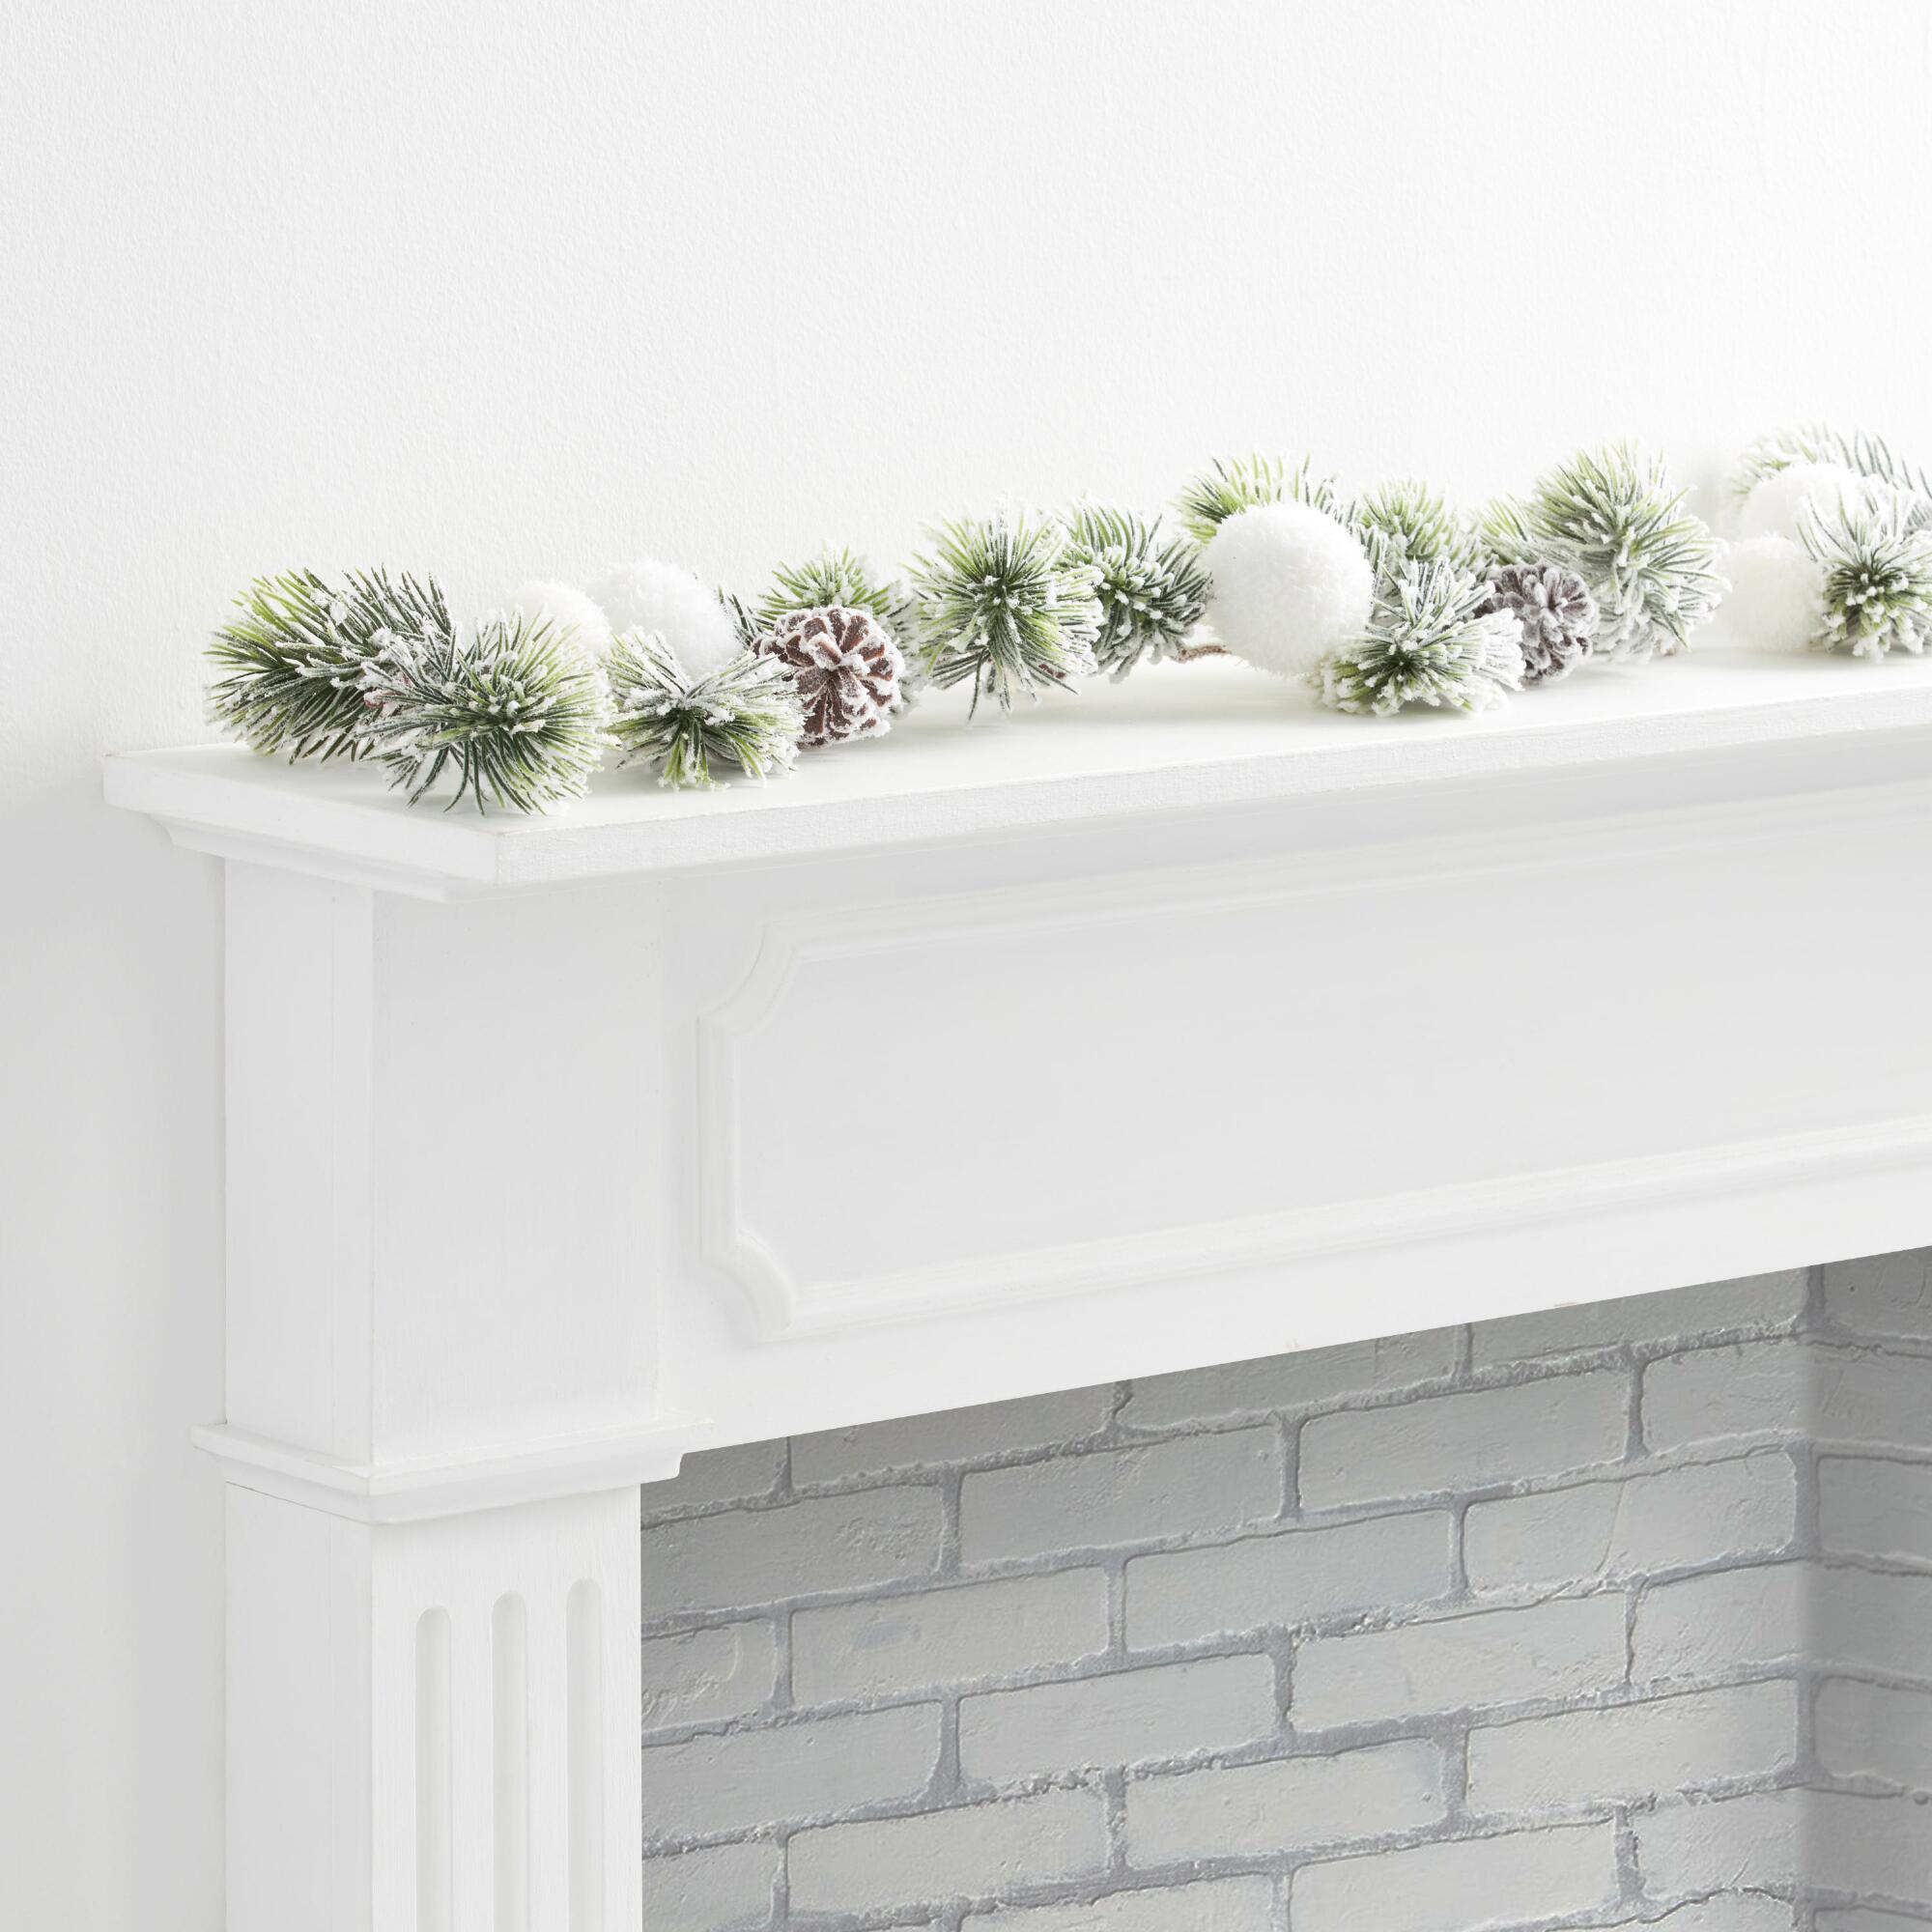 Faux Pine and Snowballs Garland: Multi - Acrylic by World Market